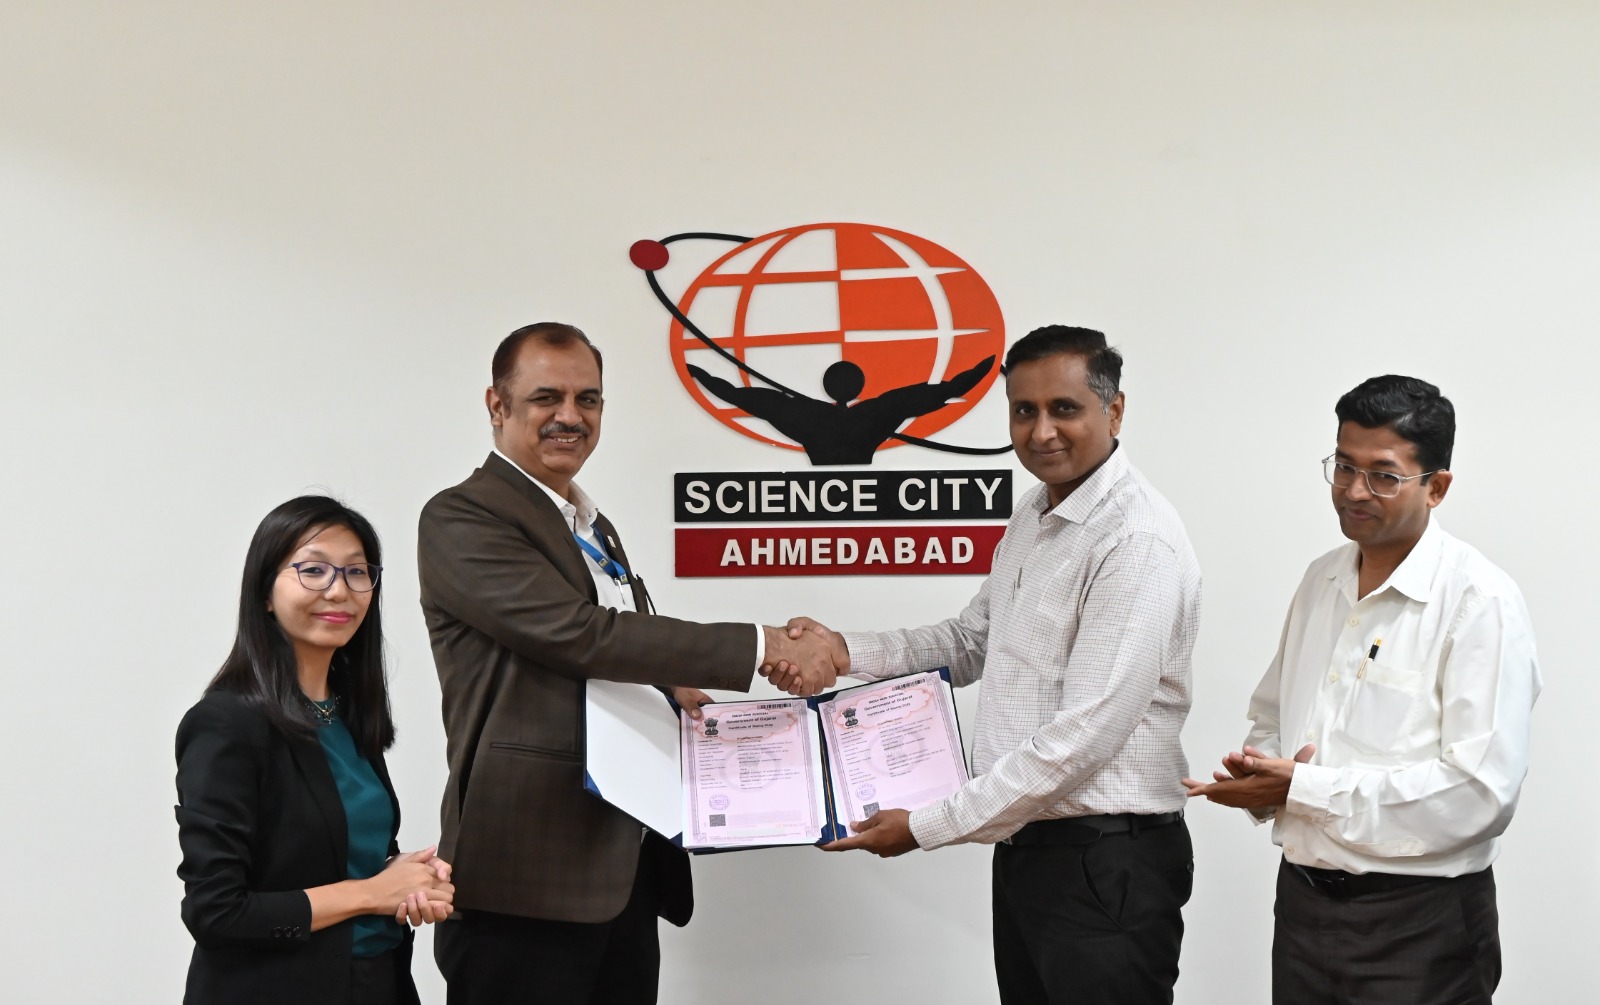 BPCL and the Government of Gujarat (GoG) signed a MoU modernise the Science Gallery at Science City